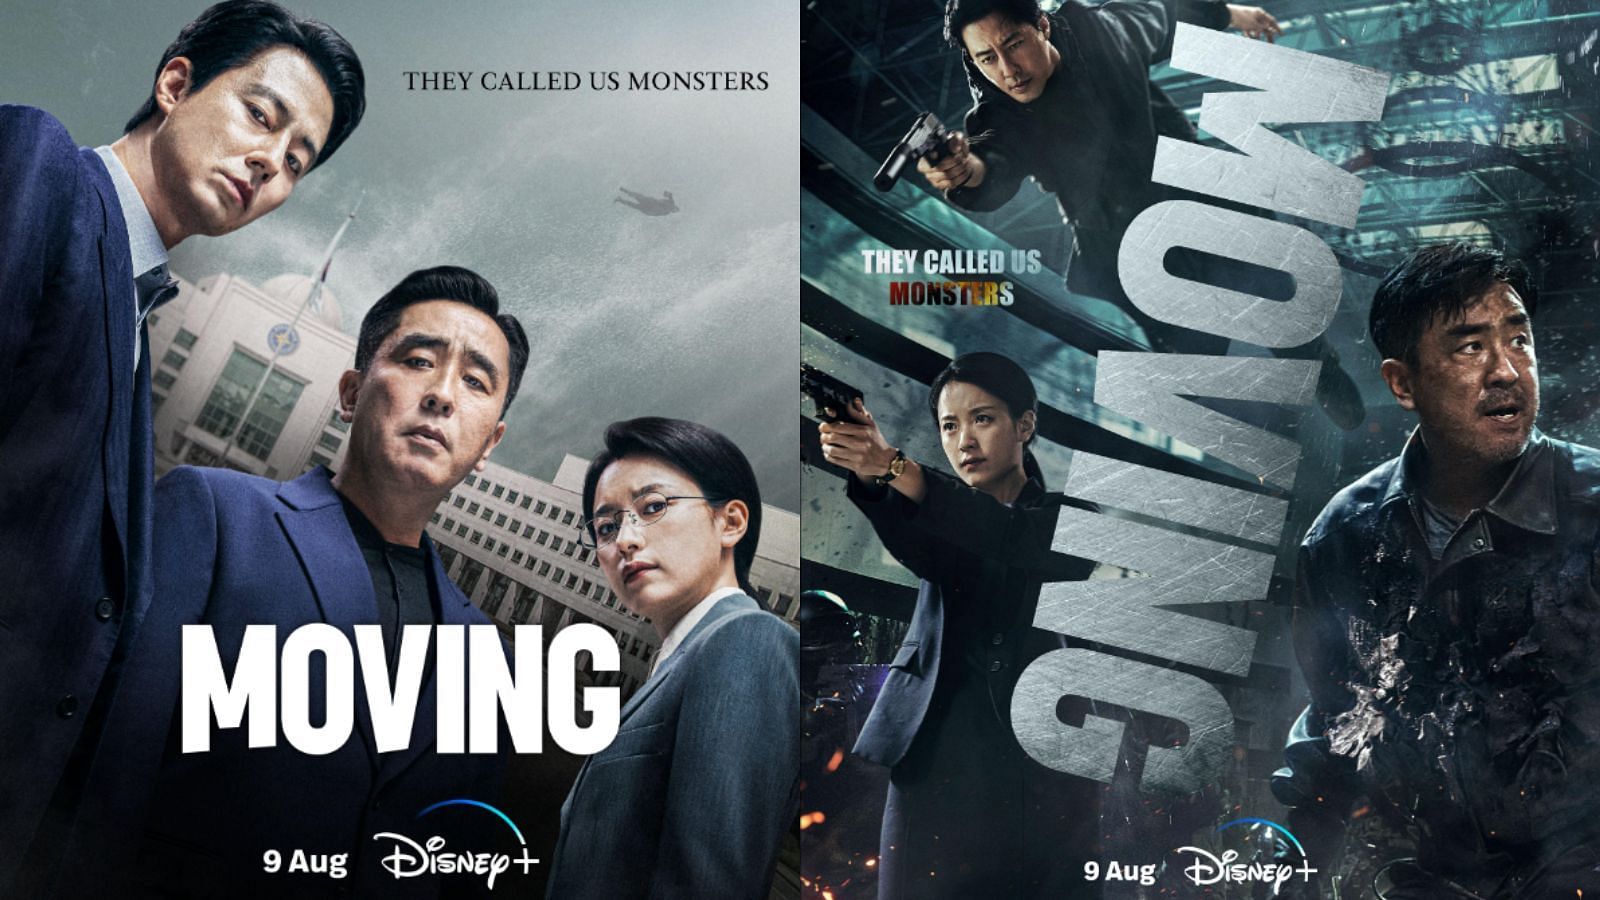 Promotional posters for Moving (Images via Disney+)